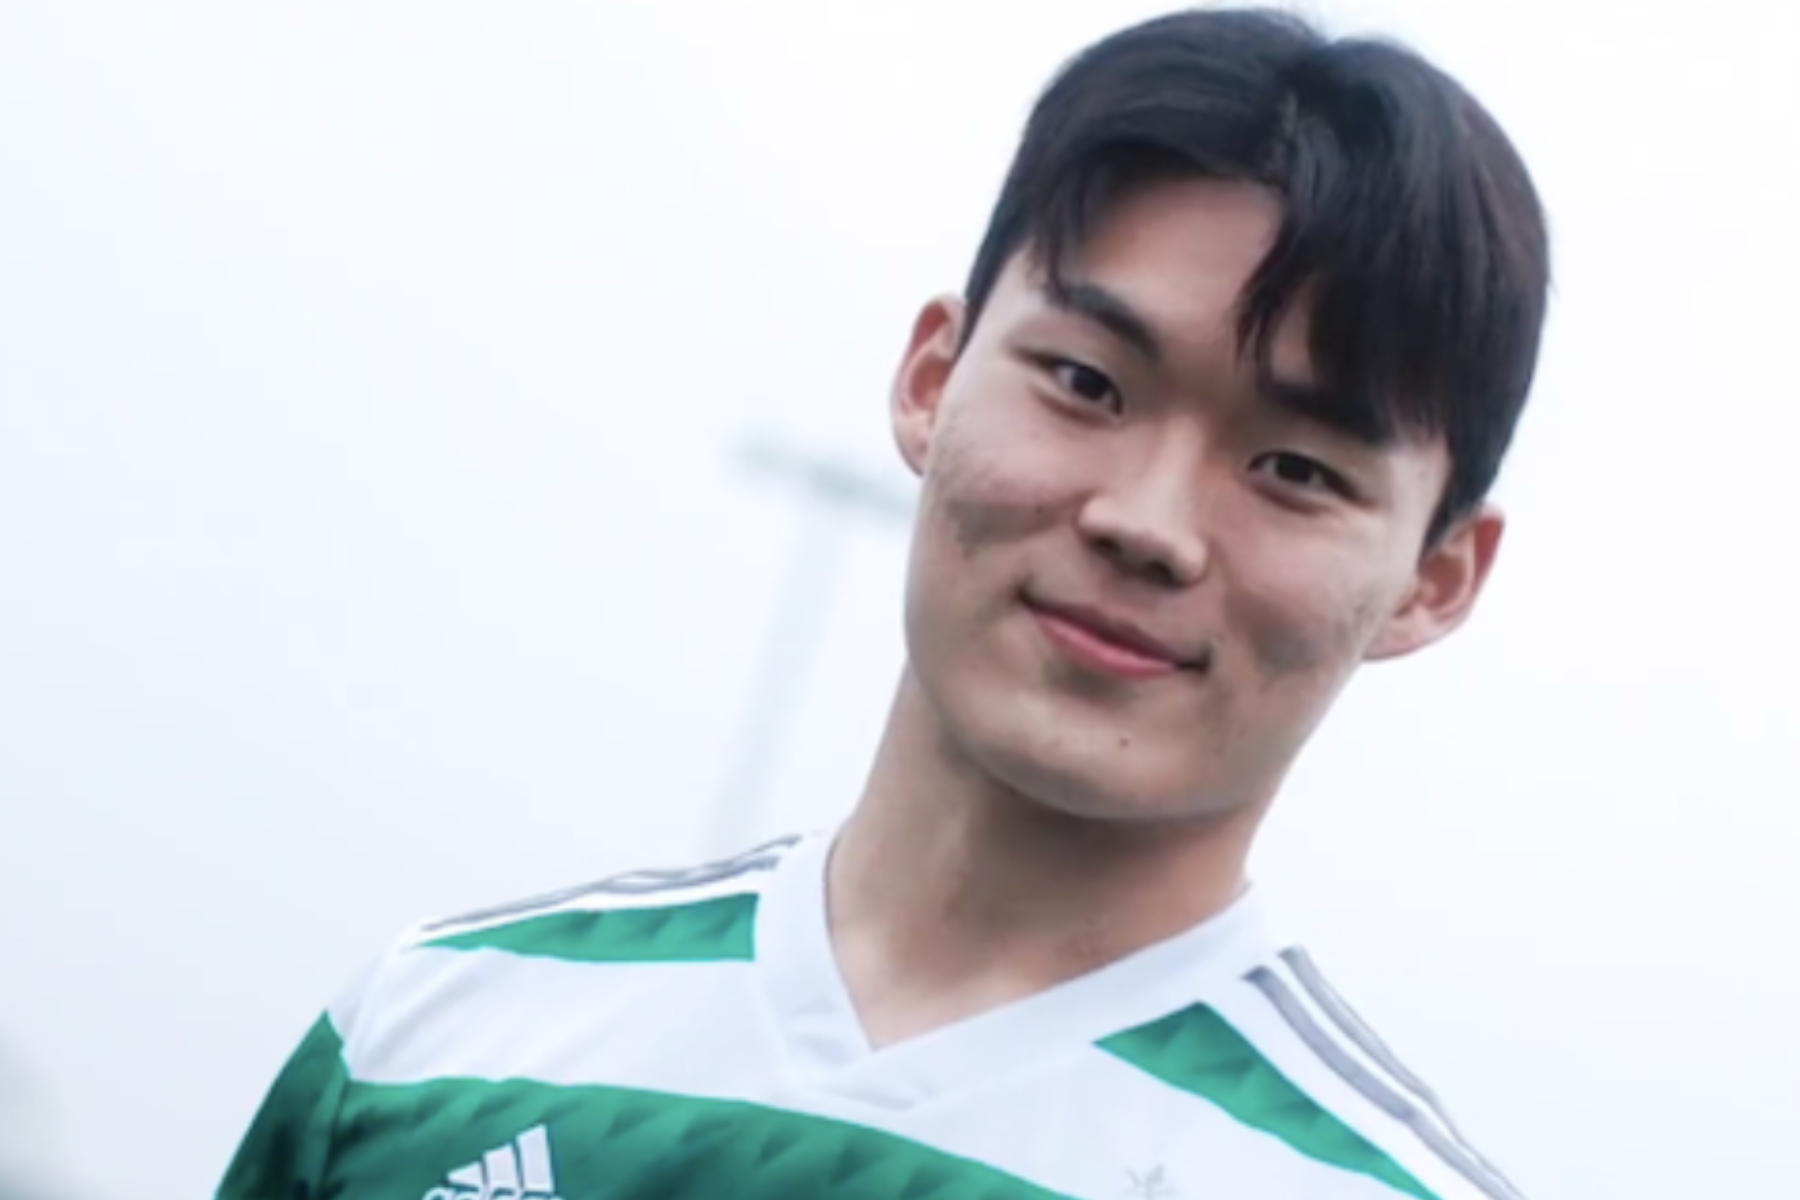 Celtic complete Oh Hyeon-gyu transfer in deal worth £2.5million